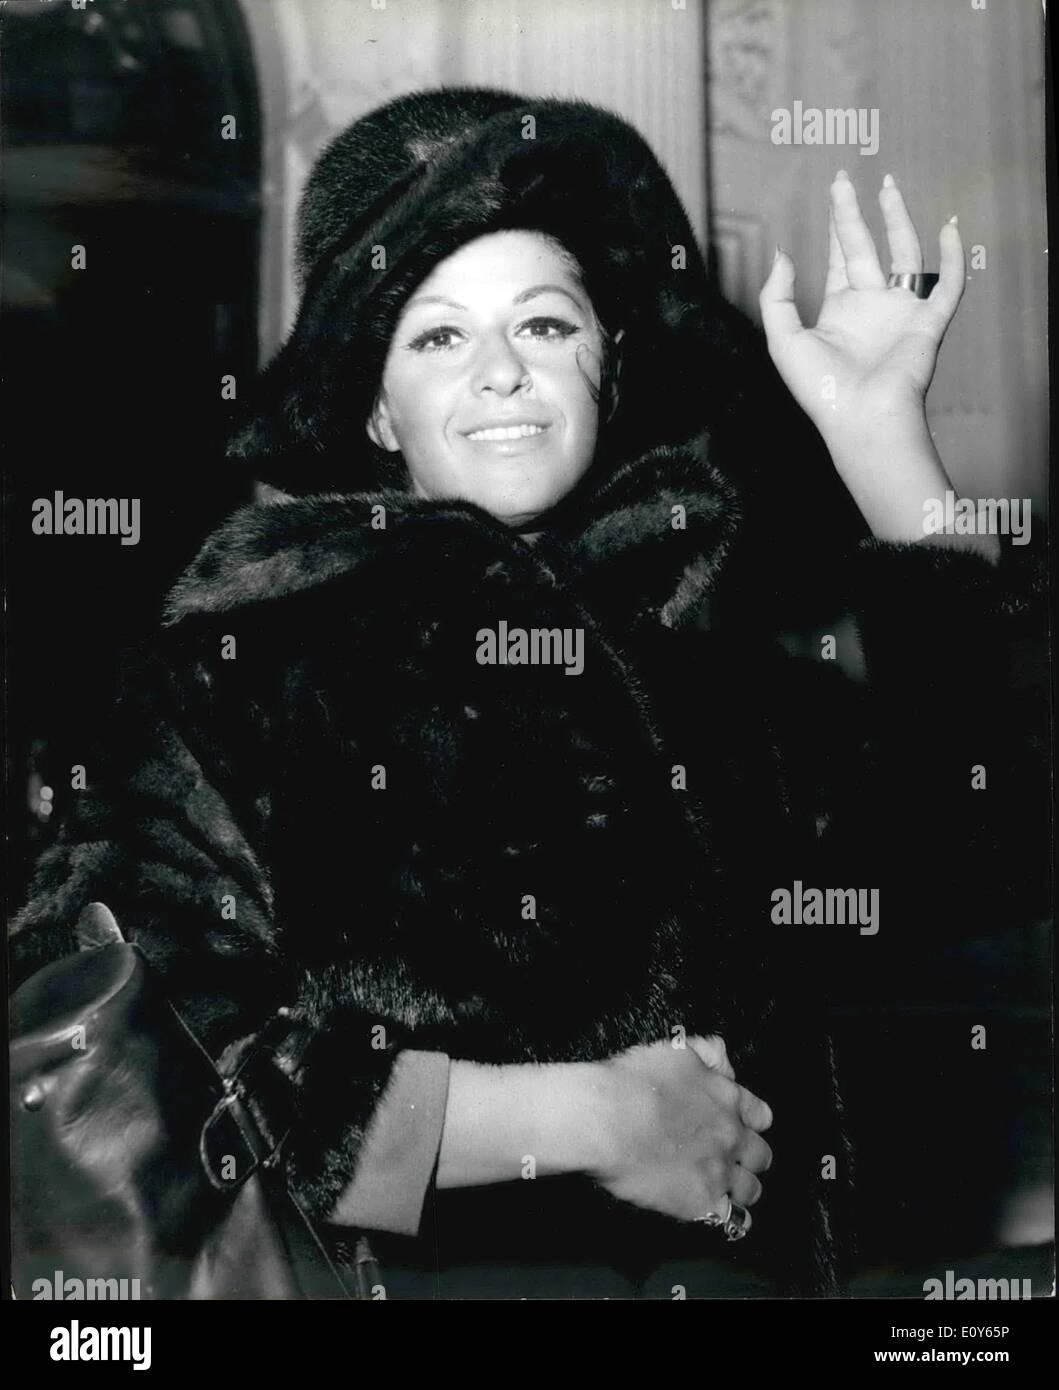 Mar. 03, 1969 - Lainie Kazan in London: Miss Lainie Kazan, the American singing star. who was understudying Barbara Streisand in Funny Girl' on Broadway , stepped in when the superstar fell-ill and had the audience roaring approval. arriving in London today. She will be in BBC- TV's Rolf Harris show on March 8th , then taped a spectacular at Talk of the town for BBC. 2. Photo shows Lainie Kazan pictured outside her hotel in London this morning. Stock Photo